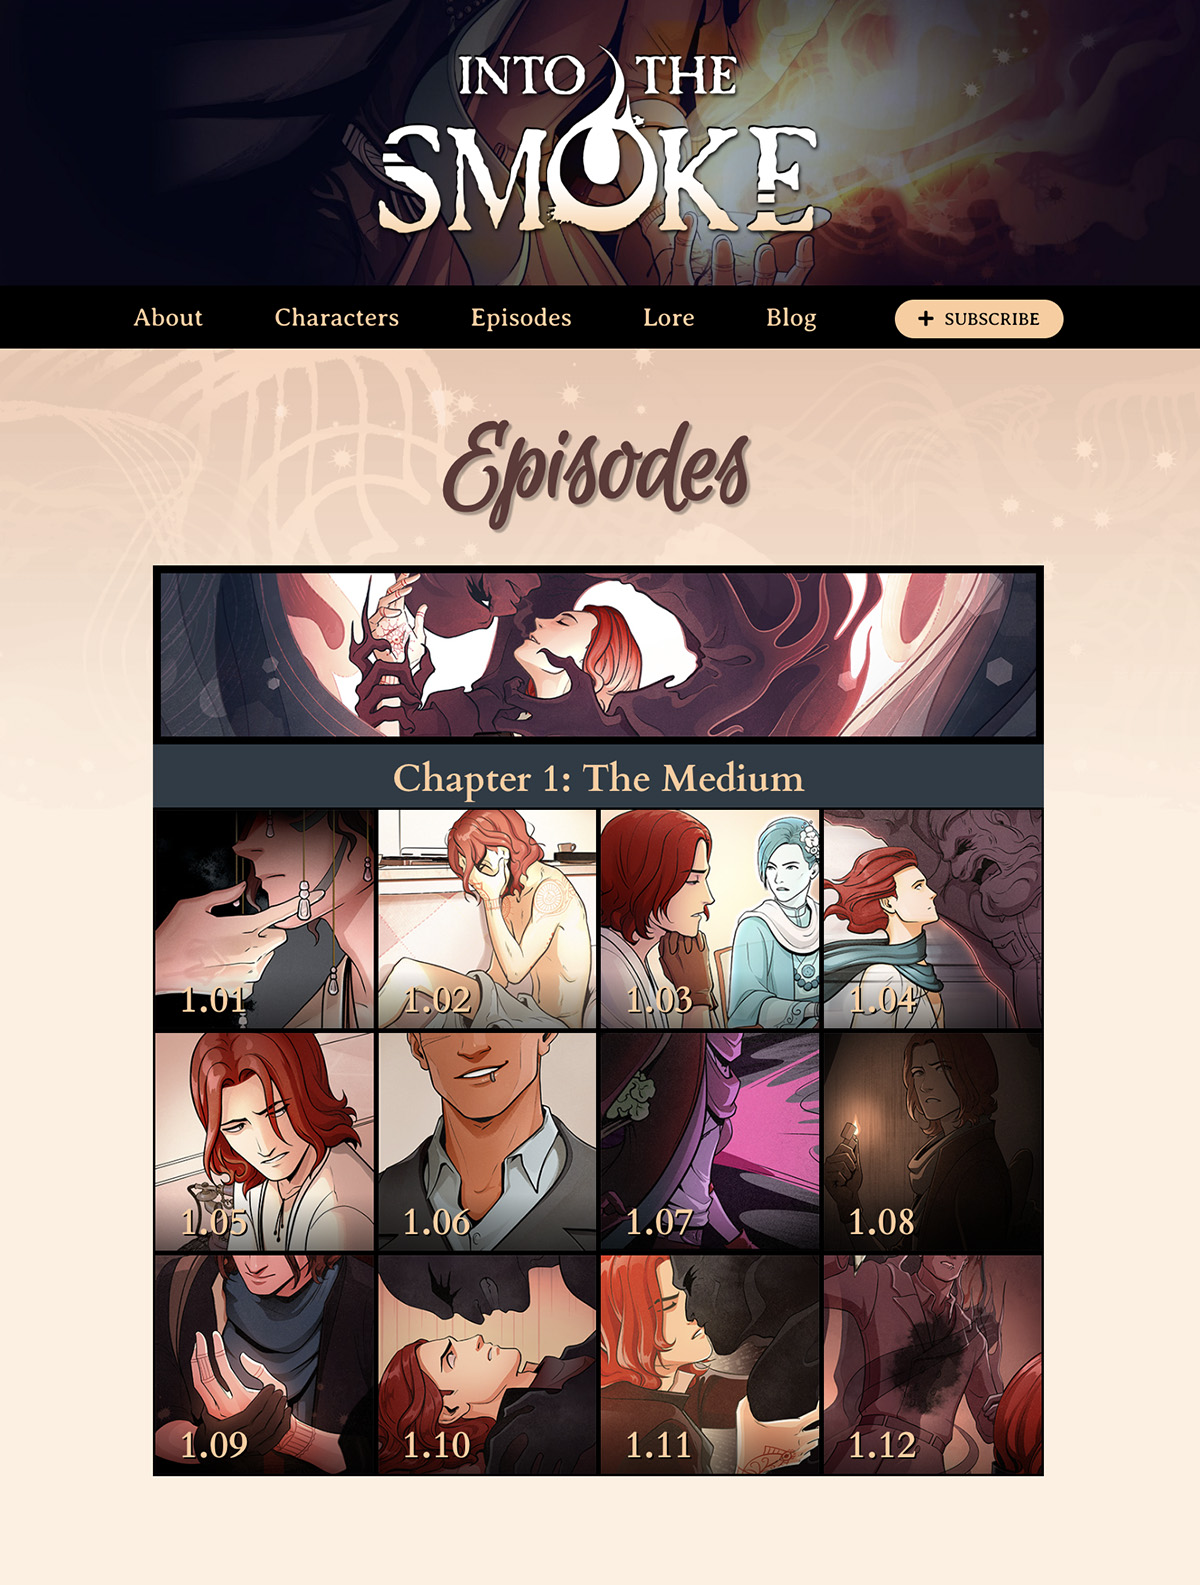 A screenshot of the Into the Smoke website's Episodes page, showing thumbnails of chapter 1.